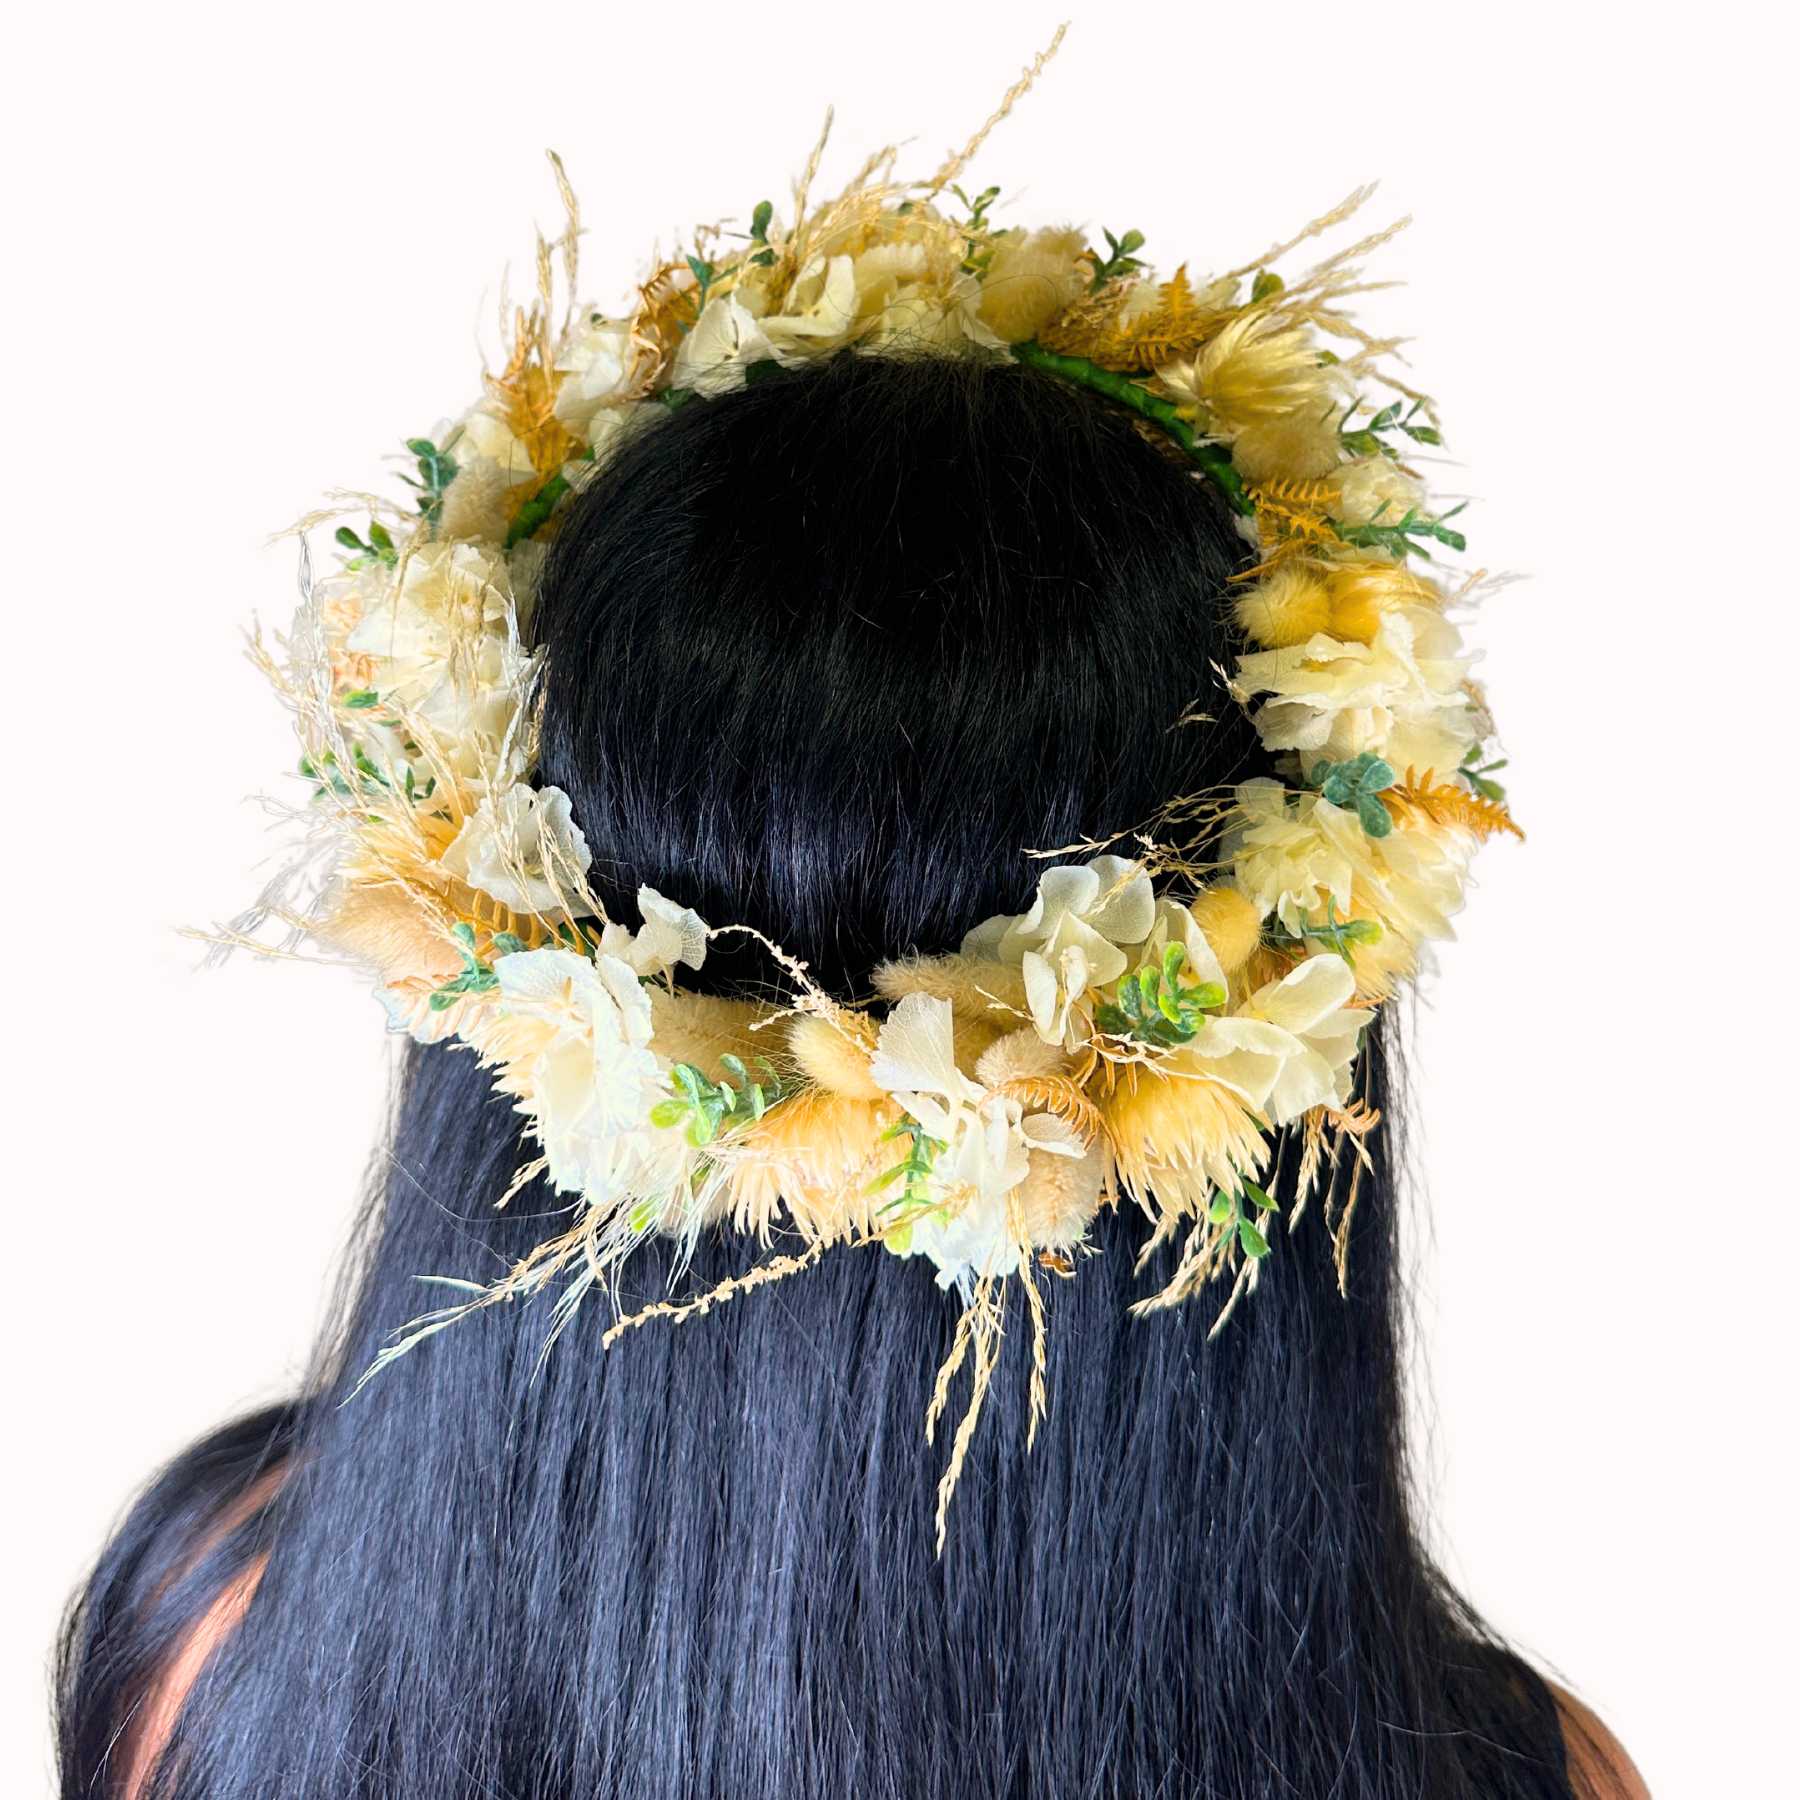 Zoomed in image of a  woman with long black hair adorned with a beautiful floral crown featuring yellow and cream flowers.